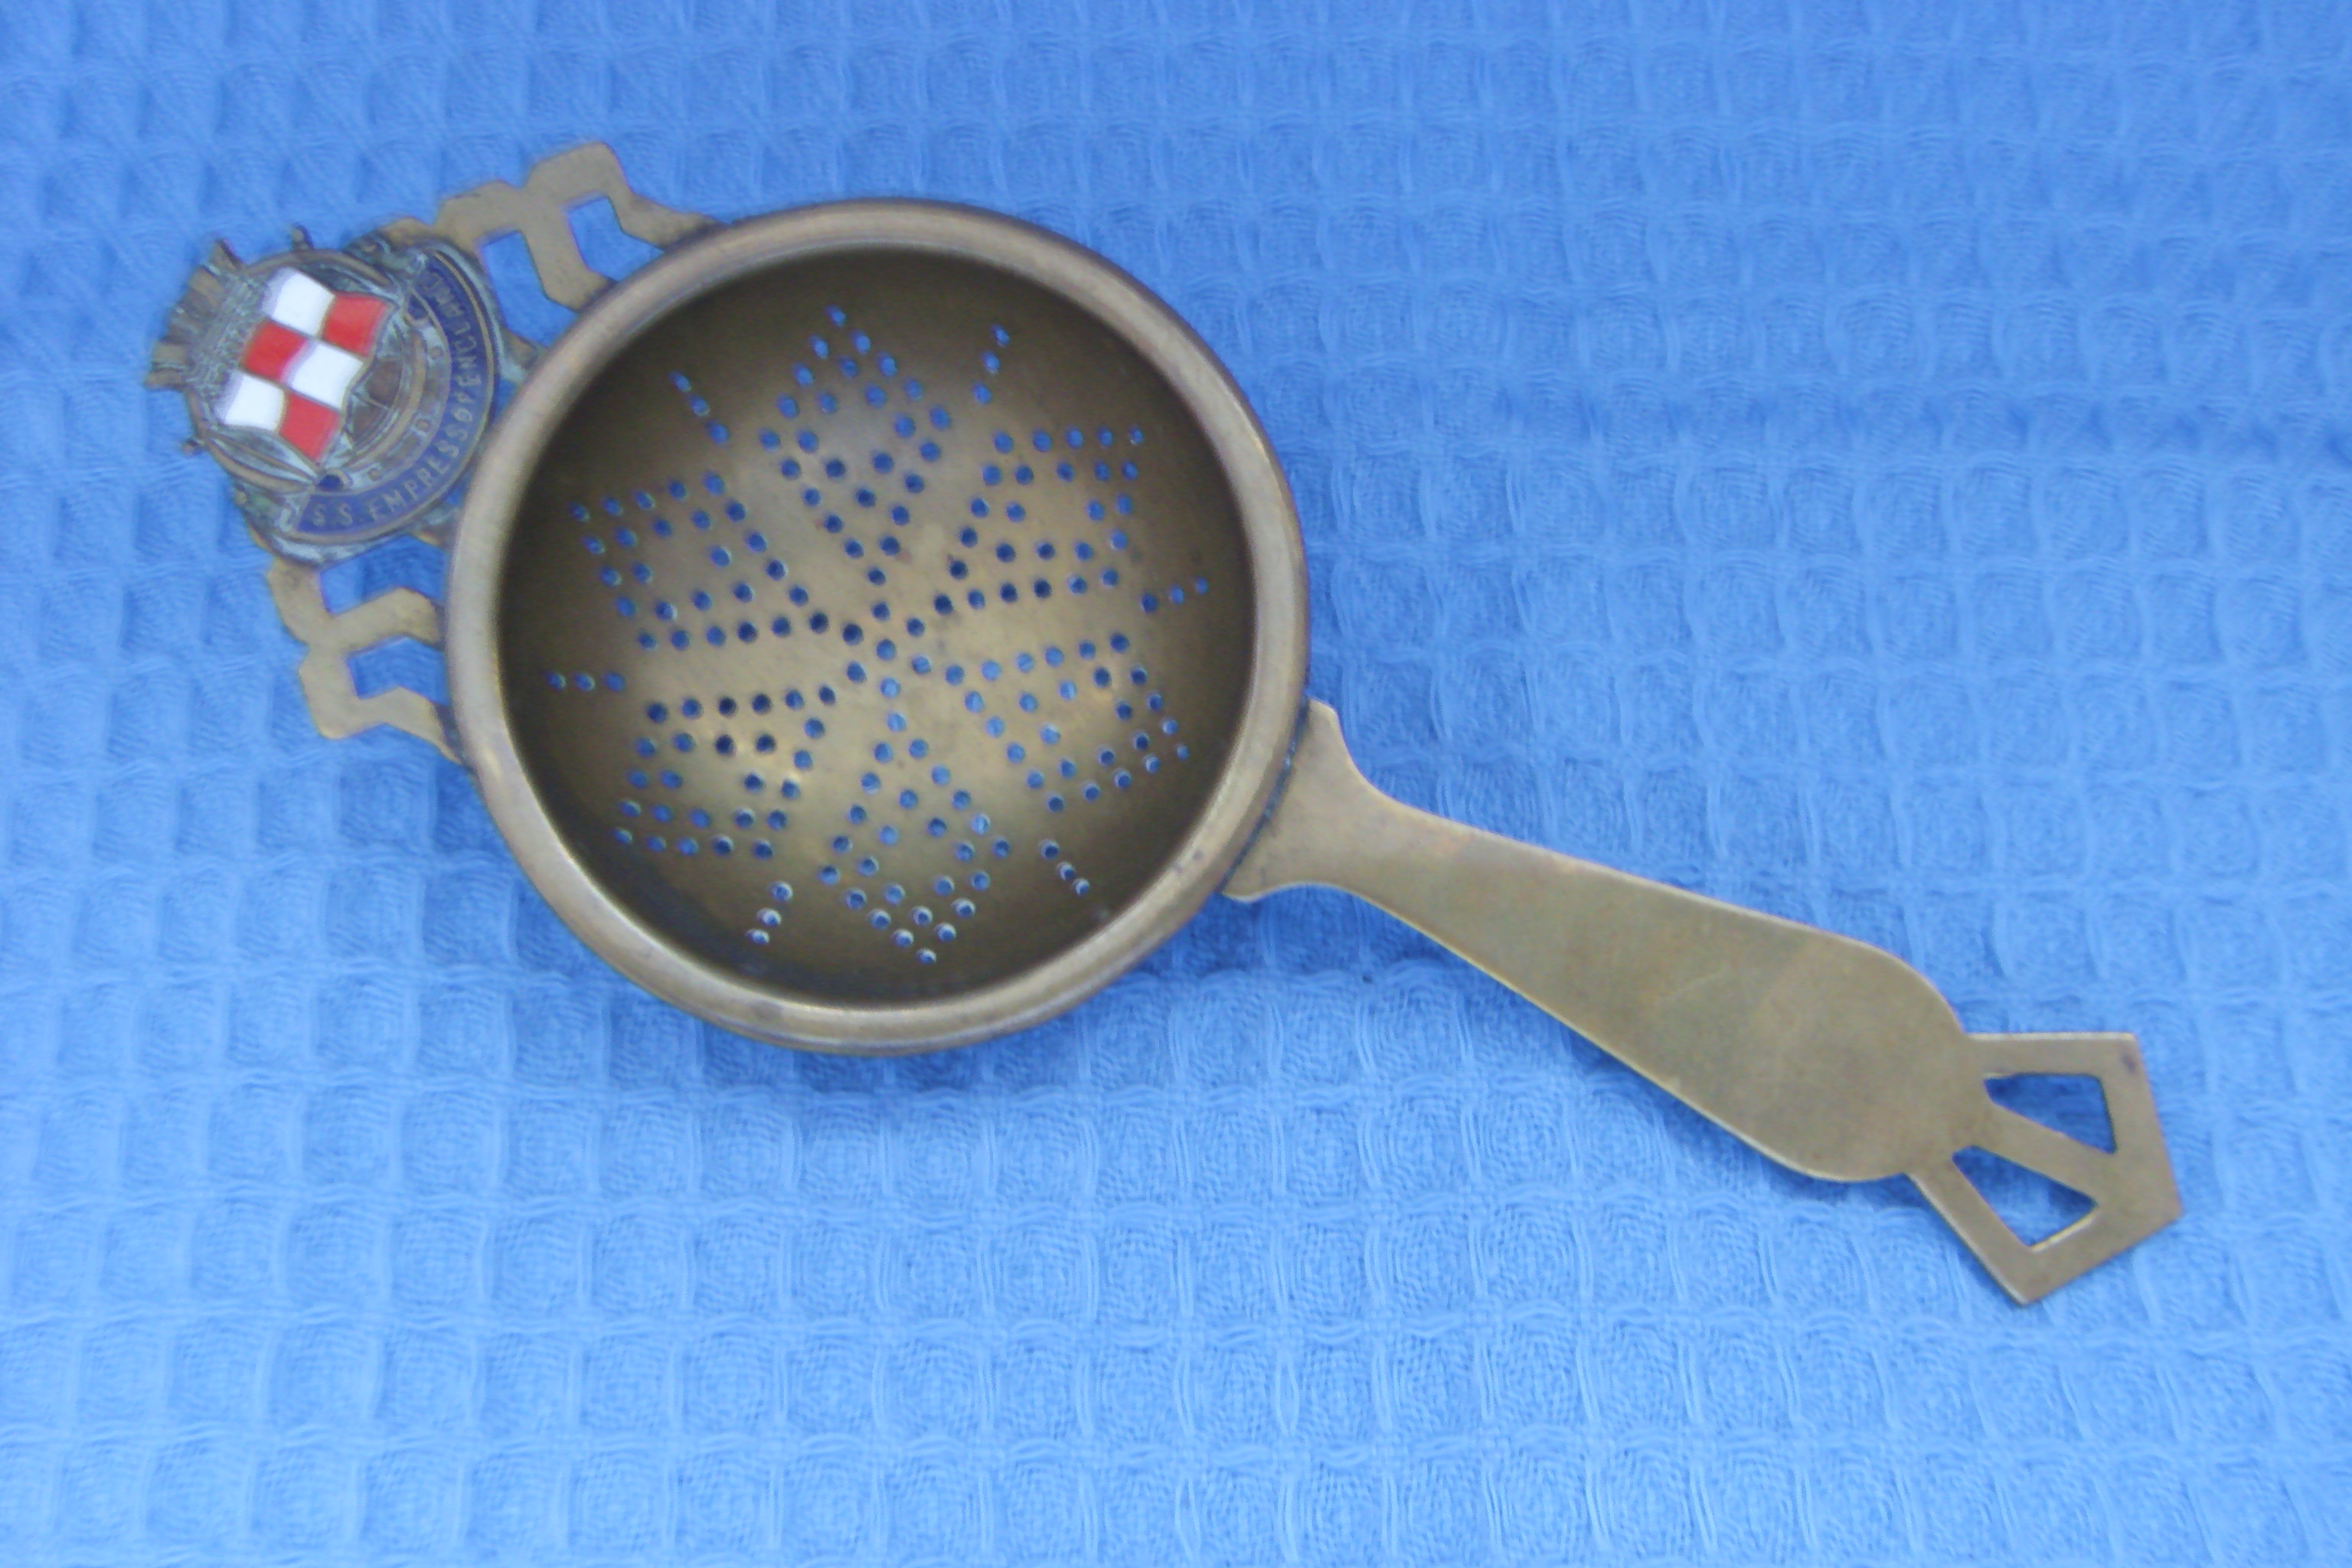 SOUVENIR TEA STRAINER FROM THE VESSEL EMPRESS OF ENGLAND OF THE CANADIAN PACIFIC STEAMSHIP COMPANY